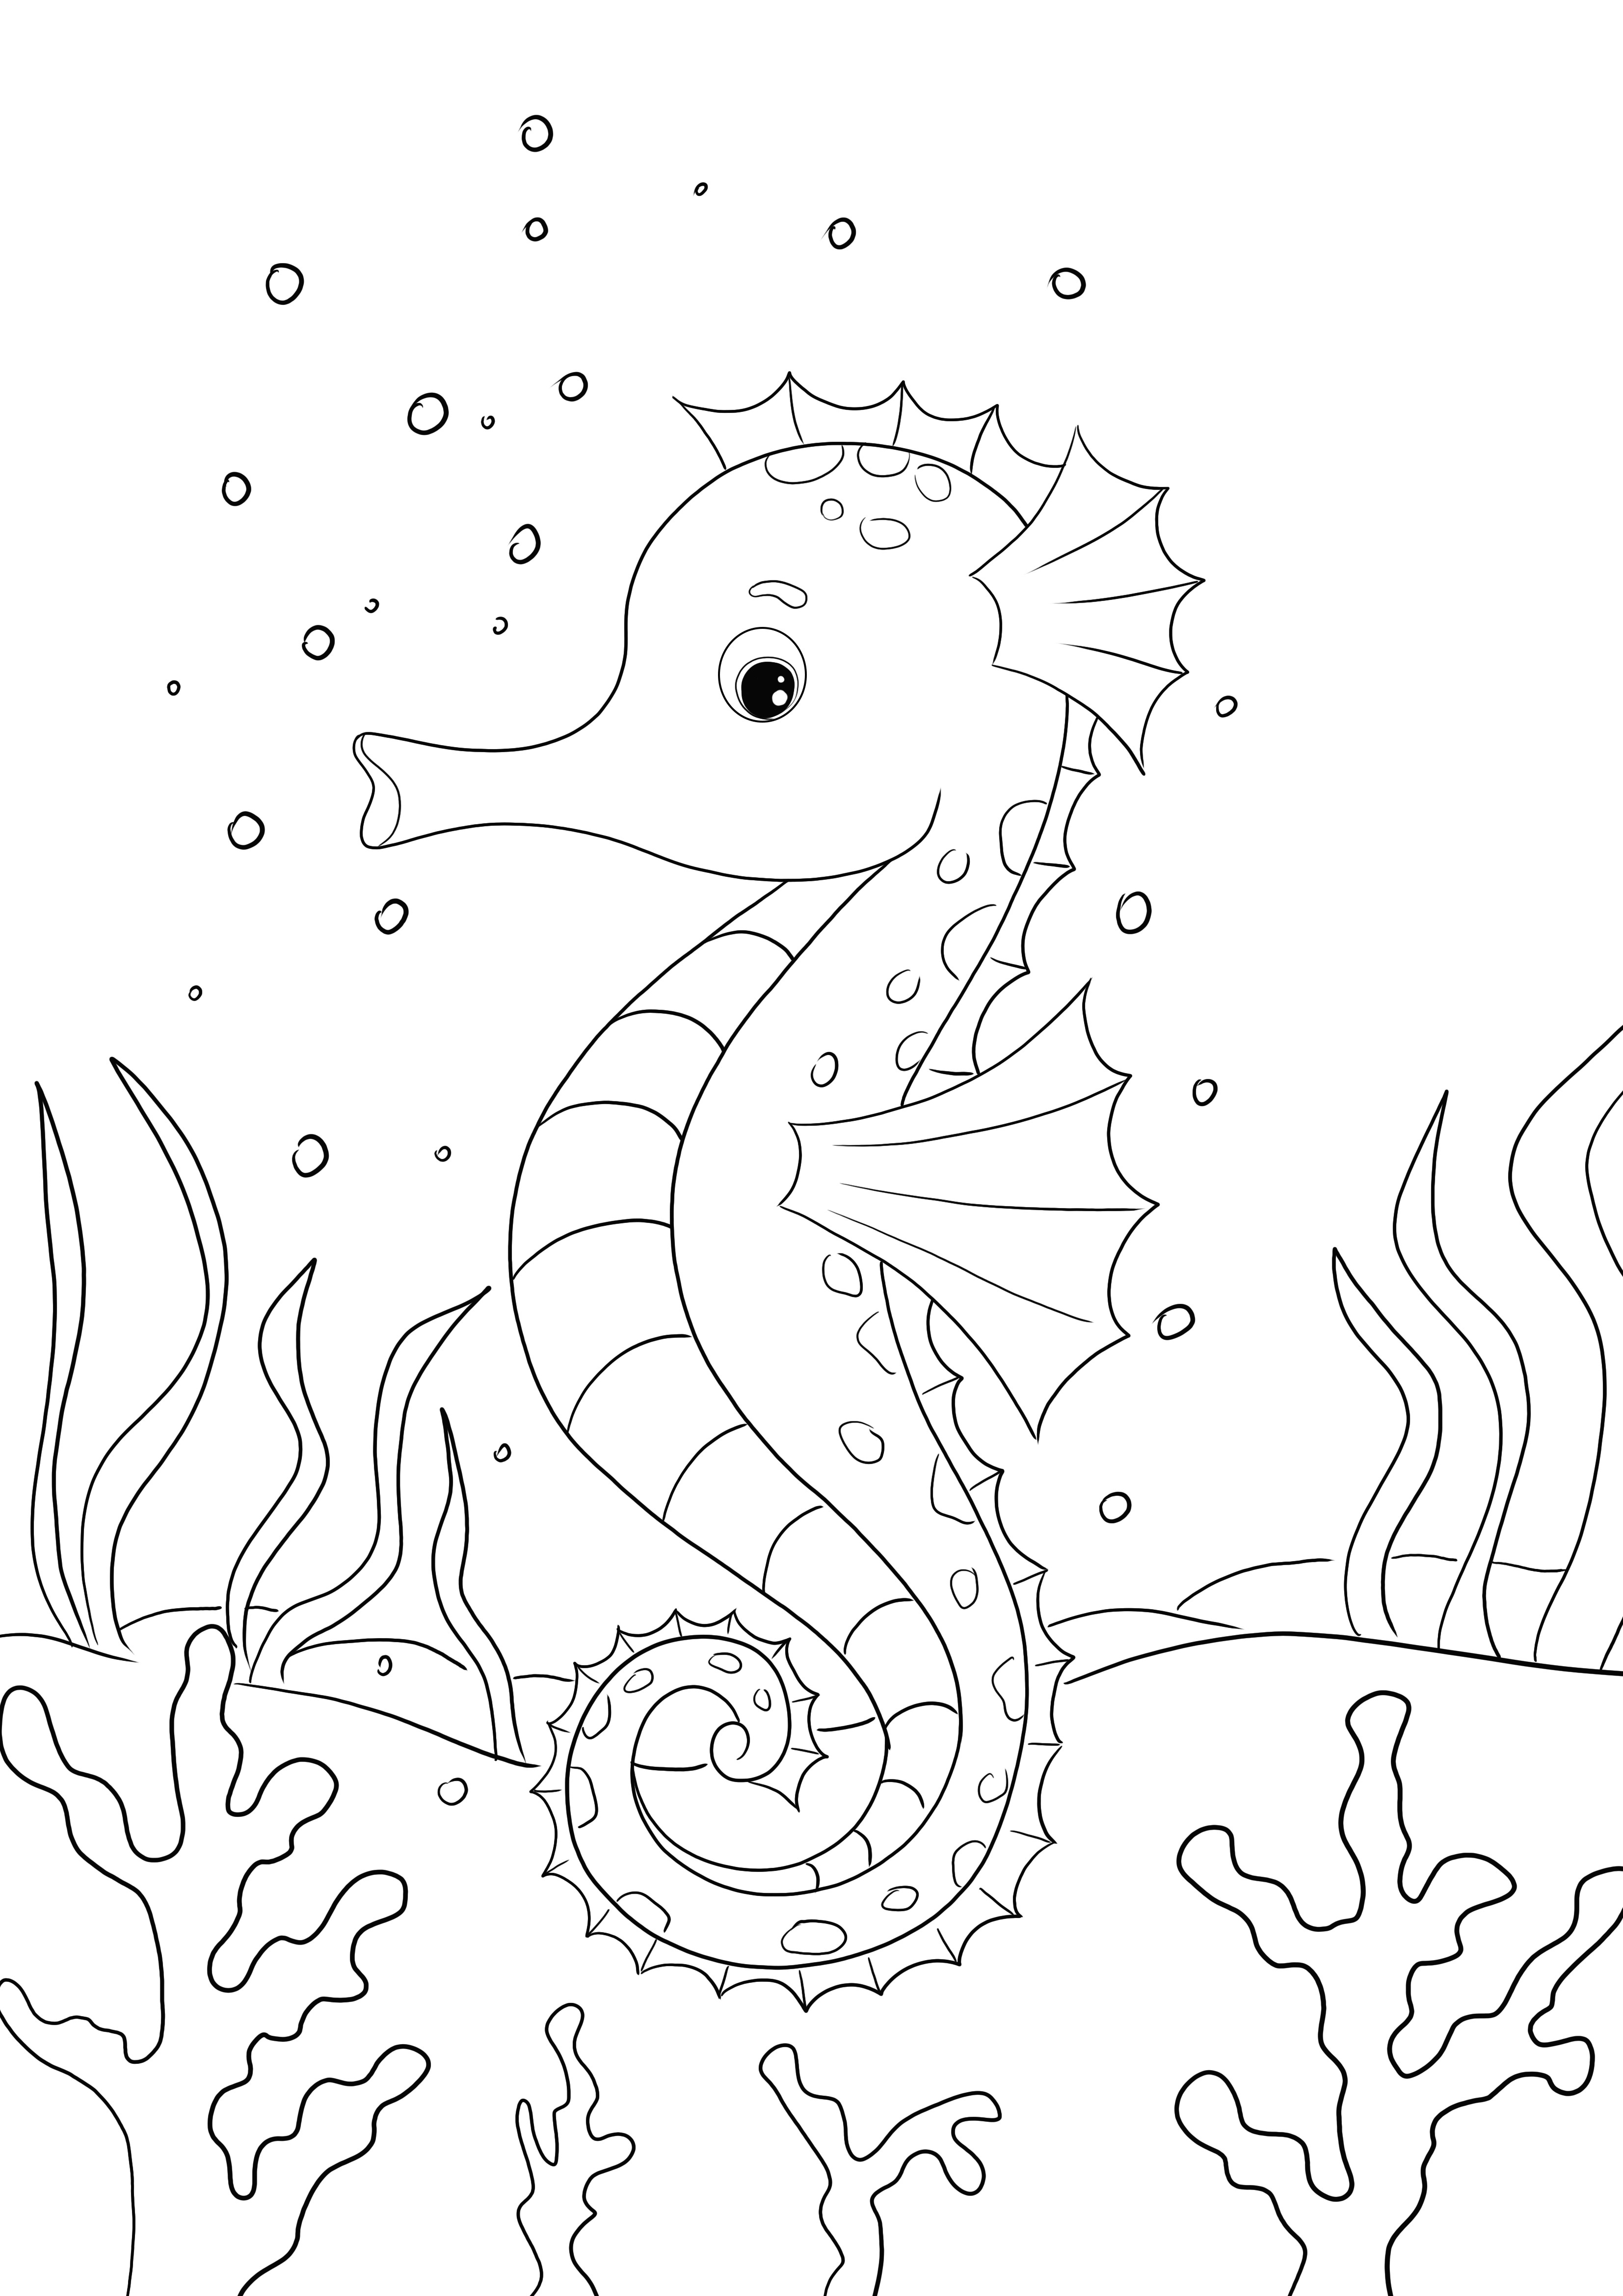 Seahorse free to print and color image for kids